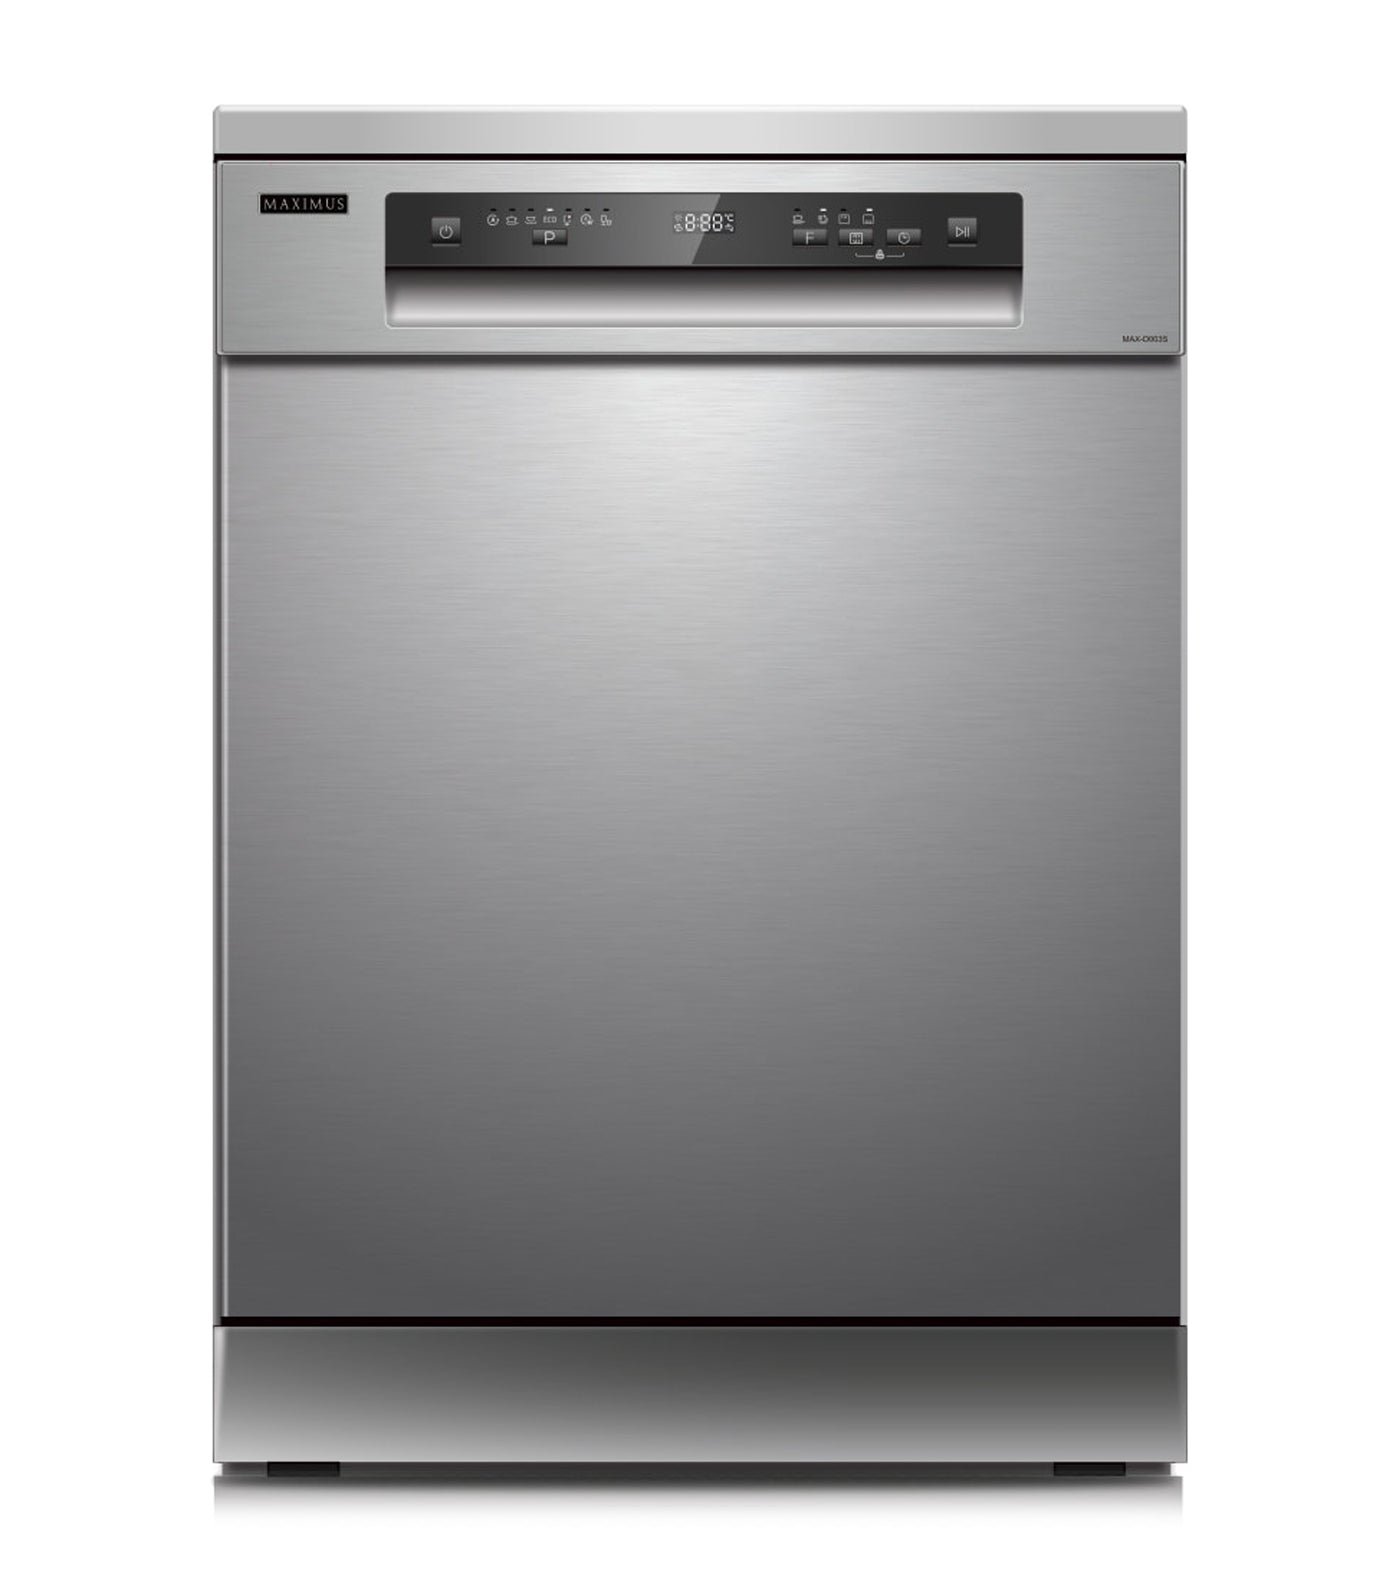 Maximus MAX-D003S Freestanding Dishwasher - Stainless Steel 